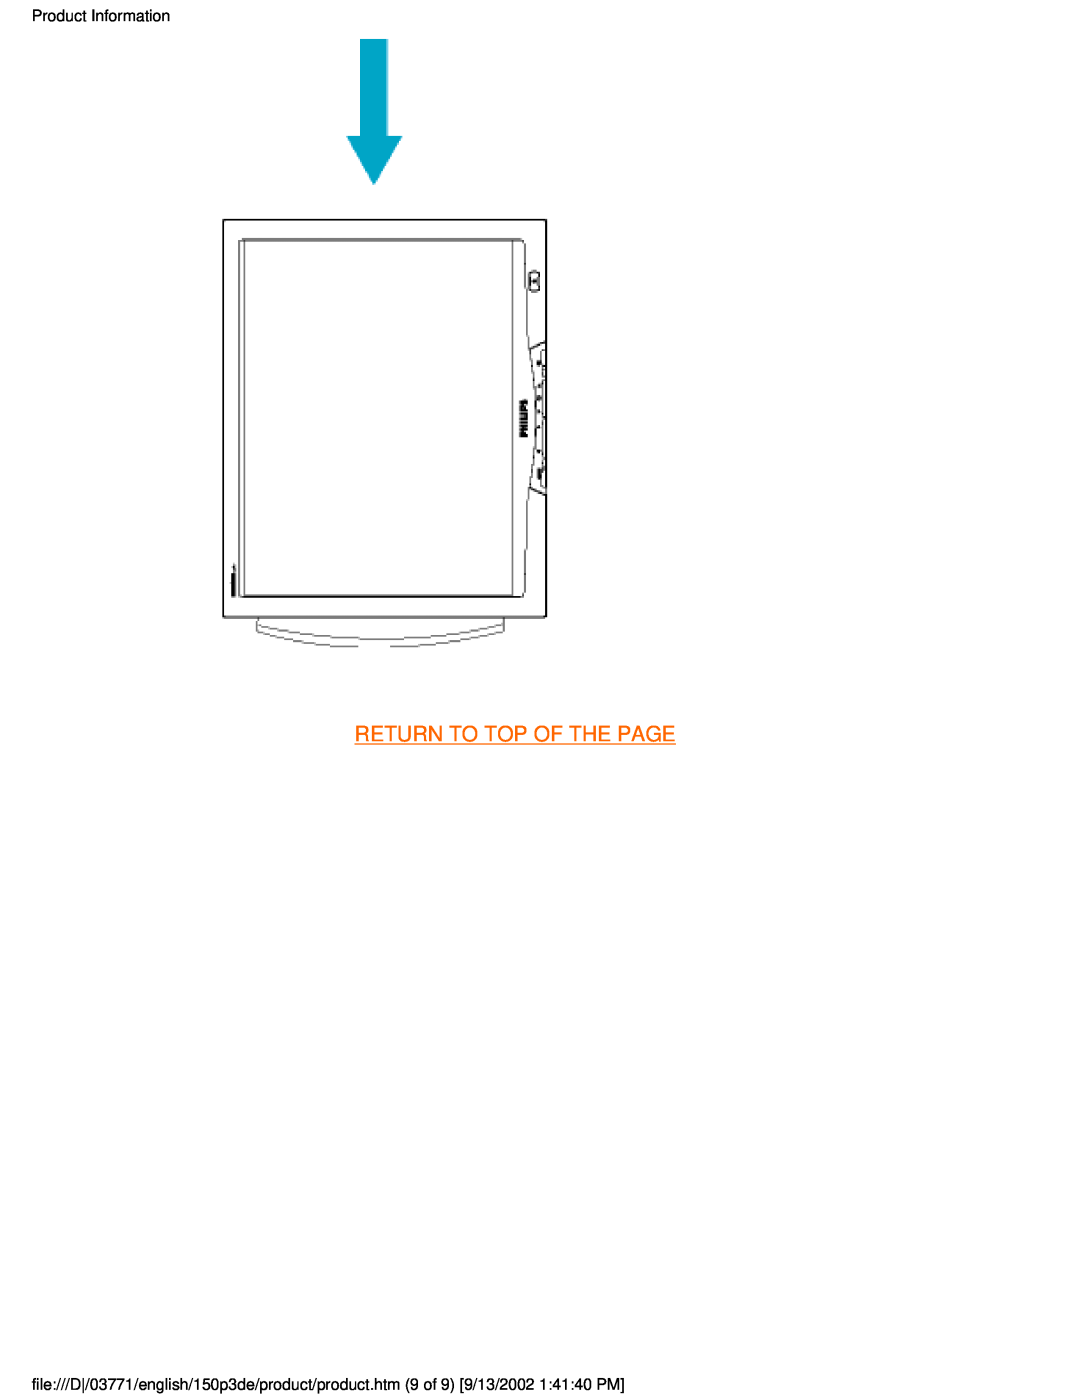 Philips 150P3E user manual Return To Top Of The Page, Product Information 